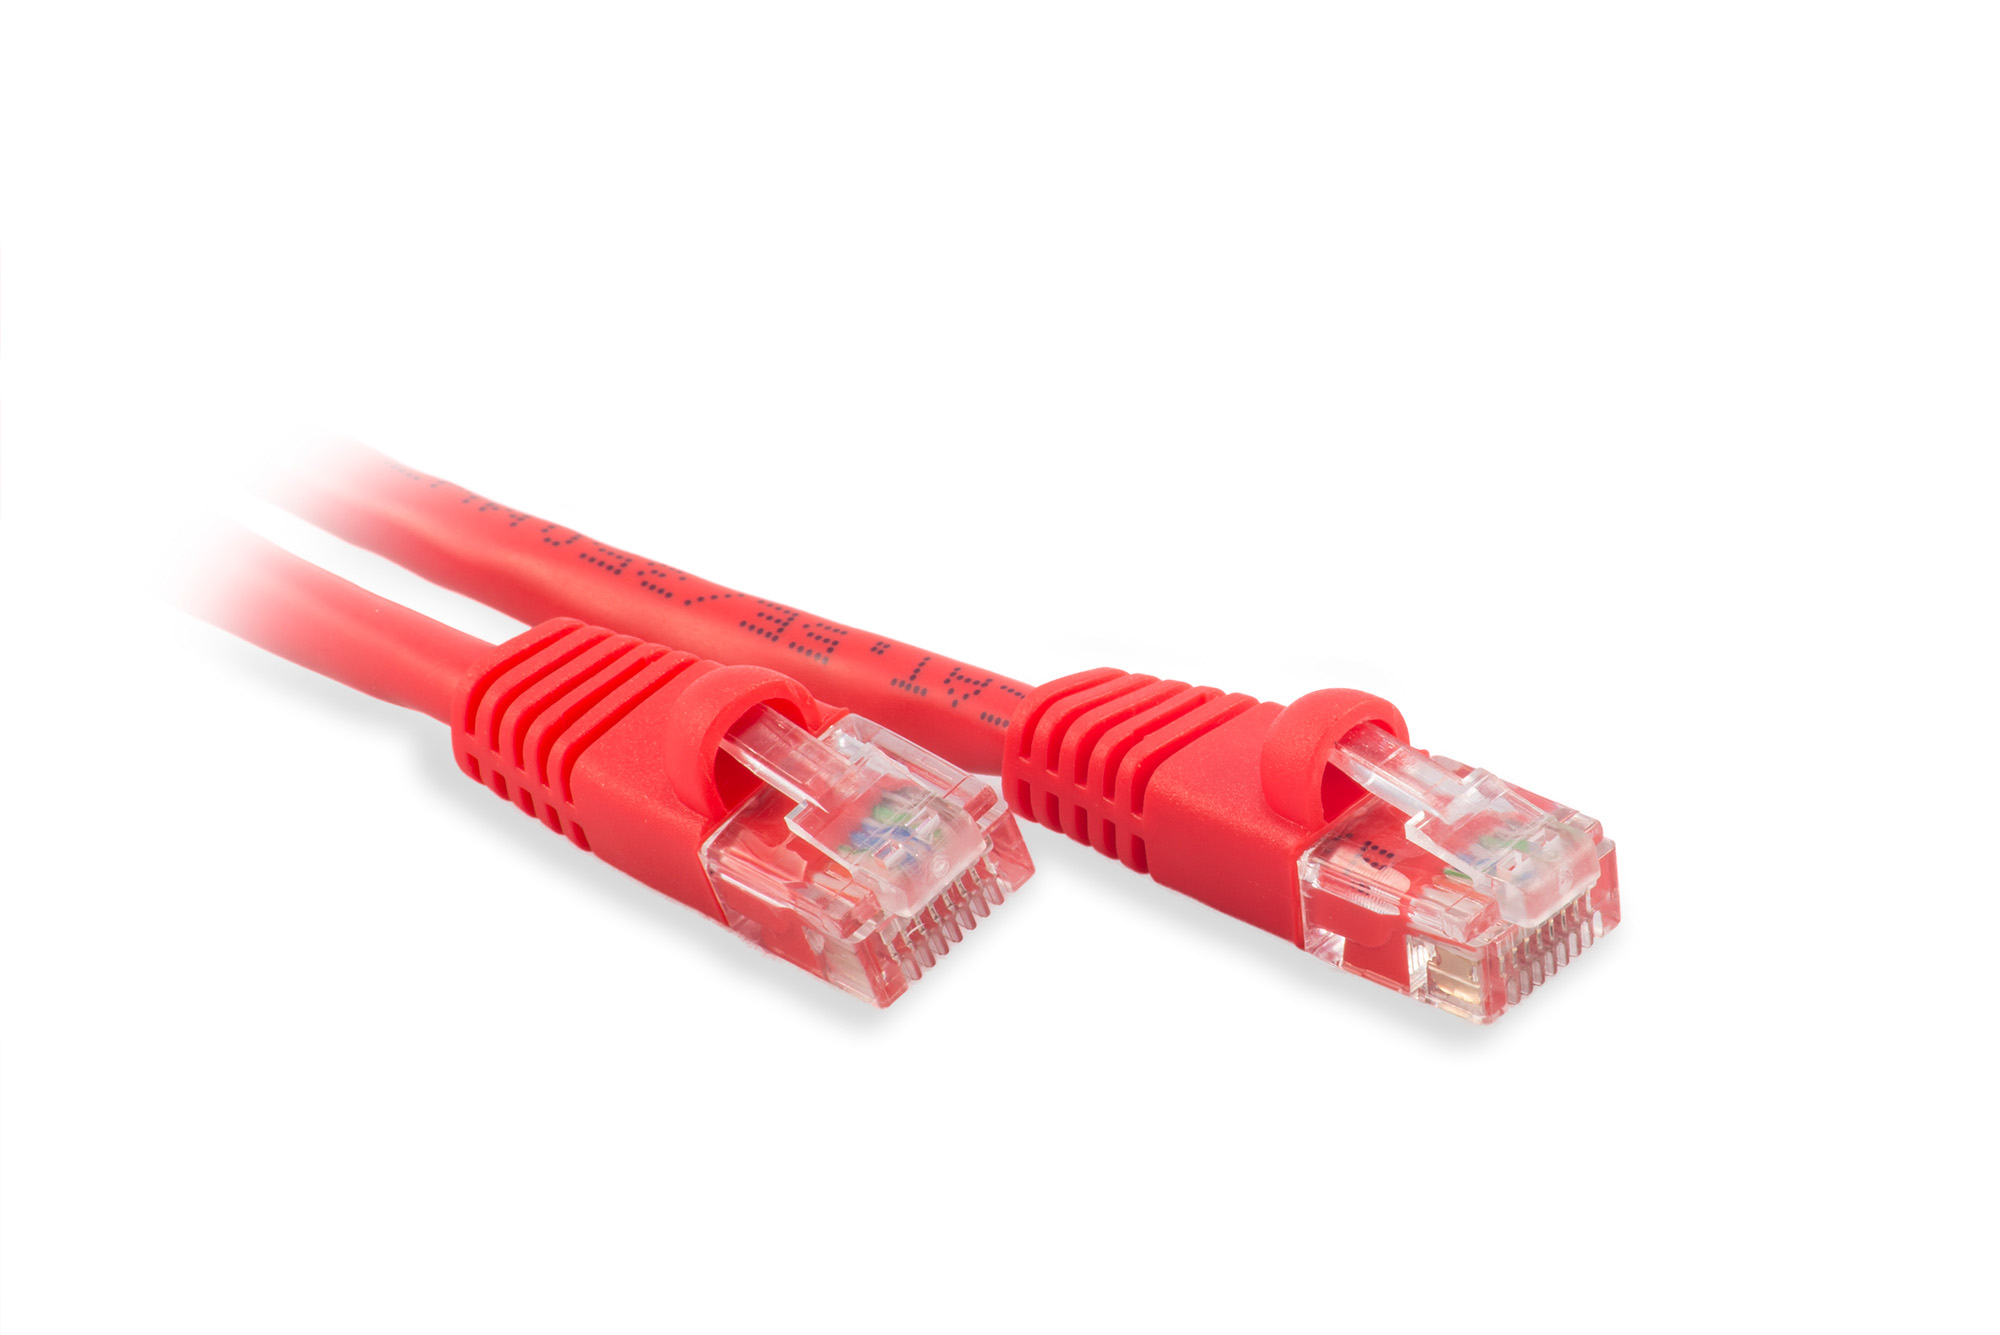 10ft Cat6 Ethernet Patch Cable - Red Color - Snagless Boot, Stranded, RJ45, 550Mhz, 24AWG